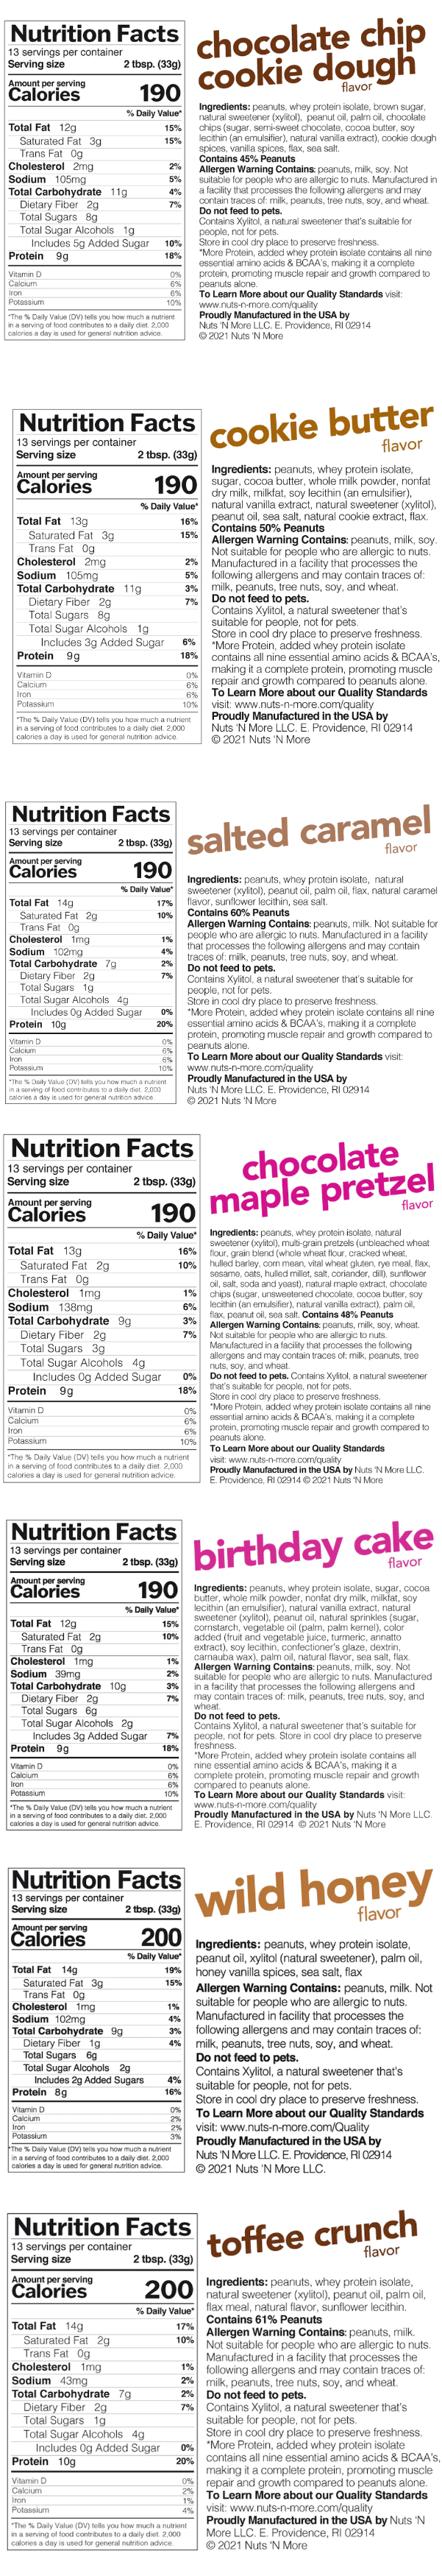 Nutrition facts for different flavors of a food product providing information such as serving size, calories, fat, sodium, carbohydrate, protein, vitamins, and allergy warning.